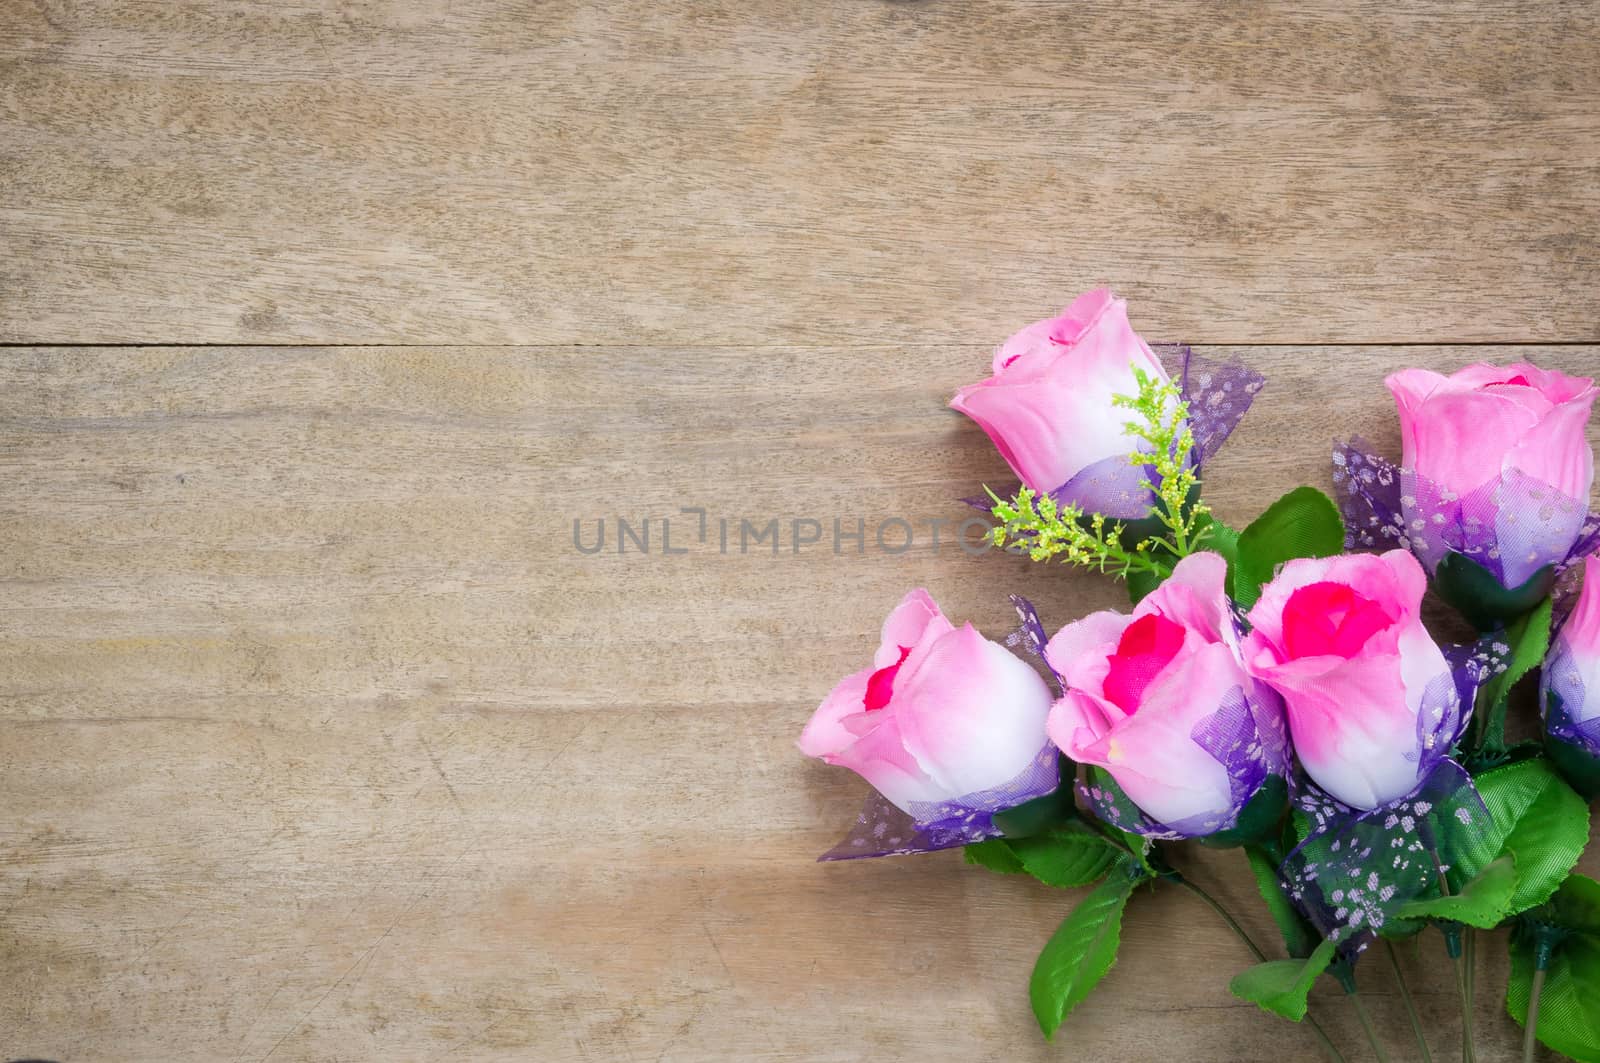 Rose  on wooden table background.